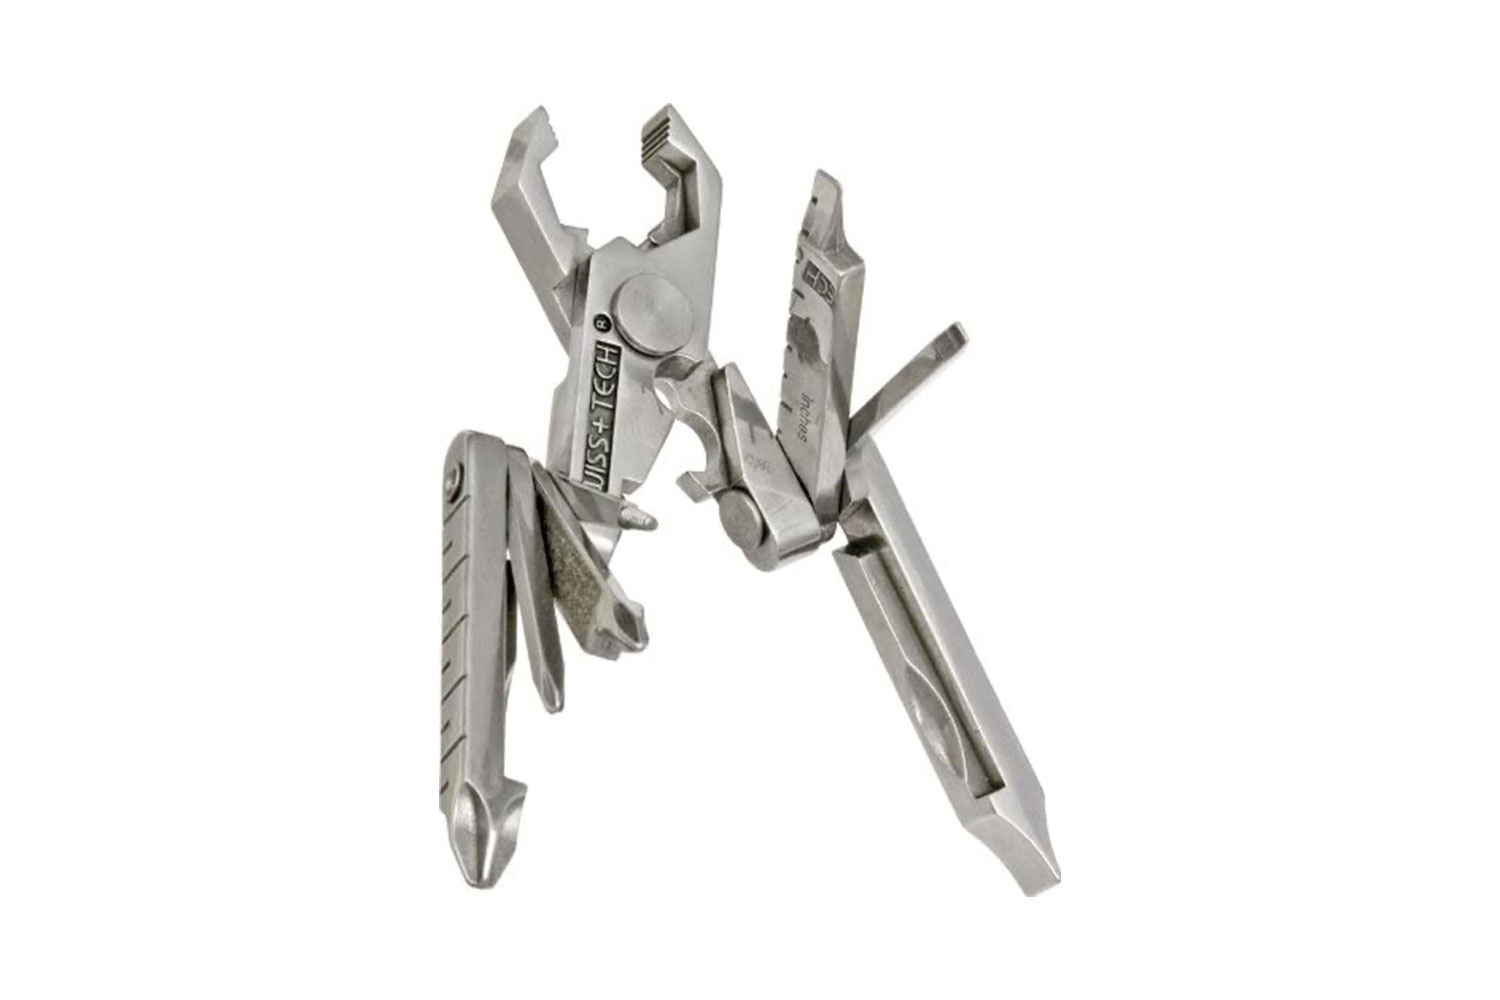 https://www.themanual.com/wp-content/uploads/sites/9/2020/04/swisstech-polished-ss-19-in-1-micro-pocket-multitool.jpg?fit=800%2C533&p=1